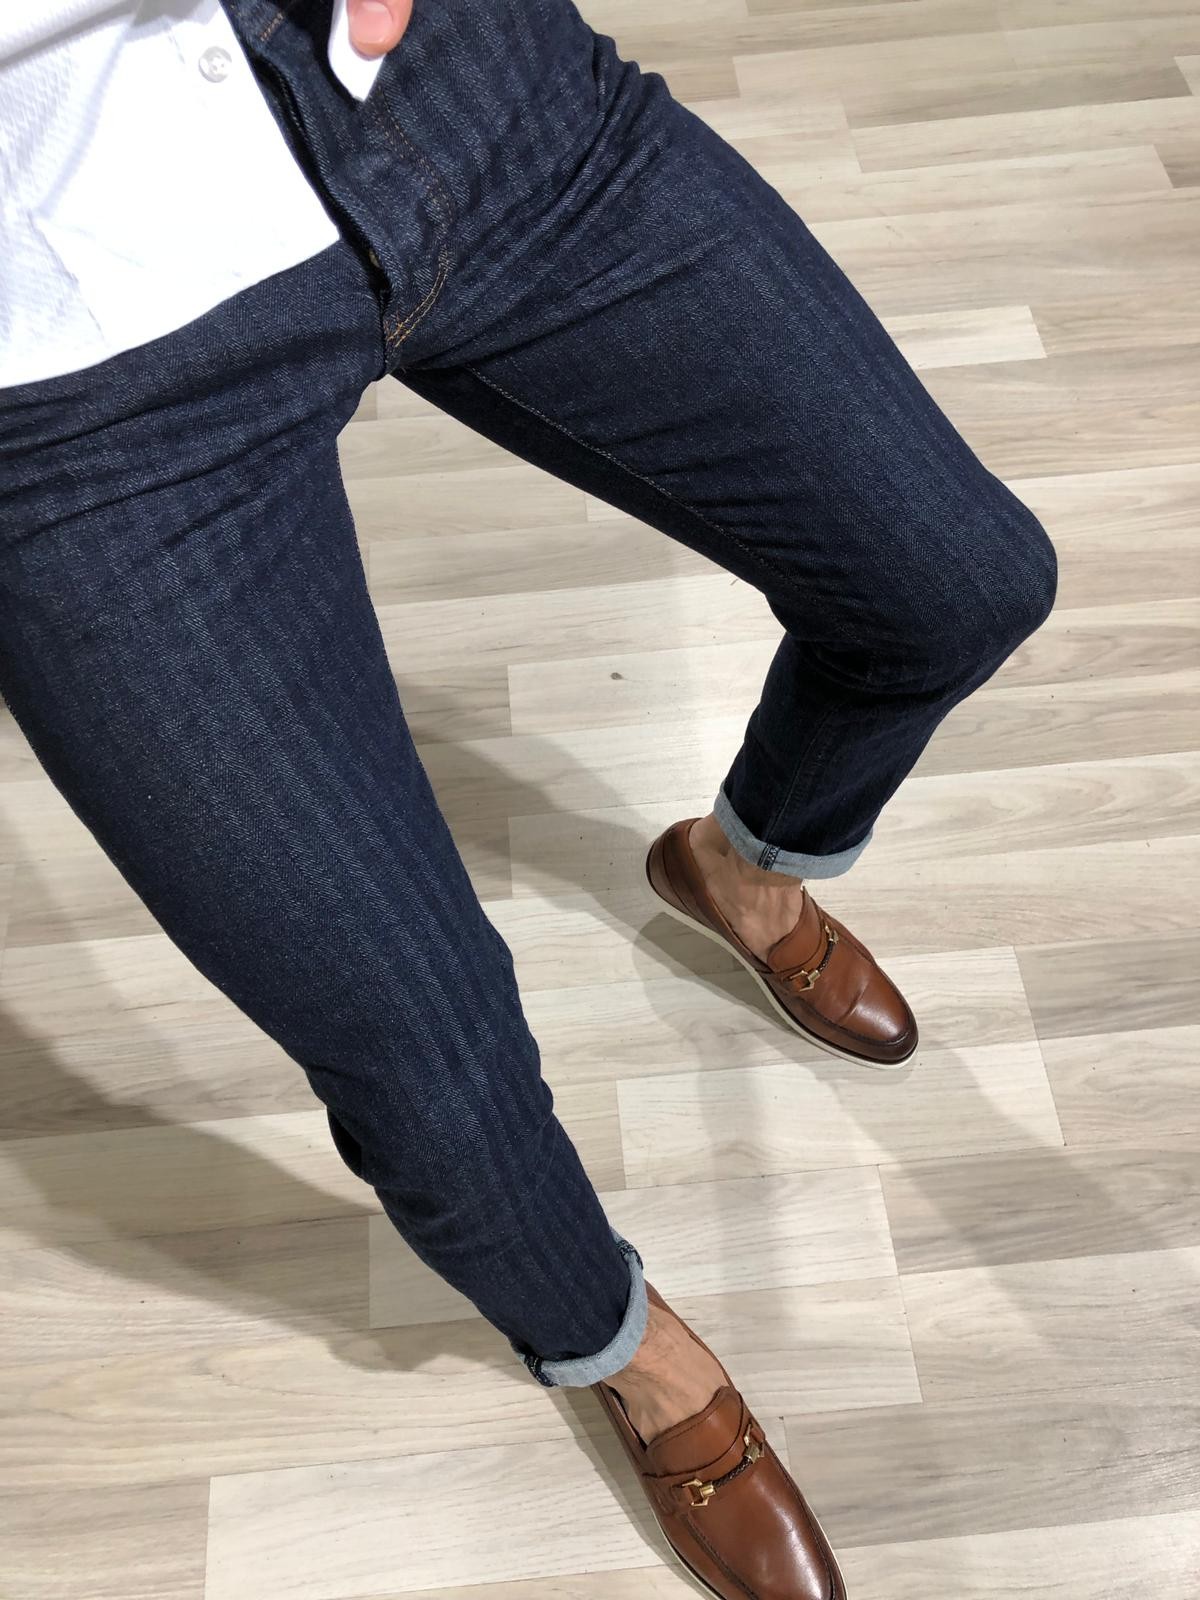 Buy Navy Blue Slim Fit Striped Jeans by Gentwith.com with Free Shipping